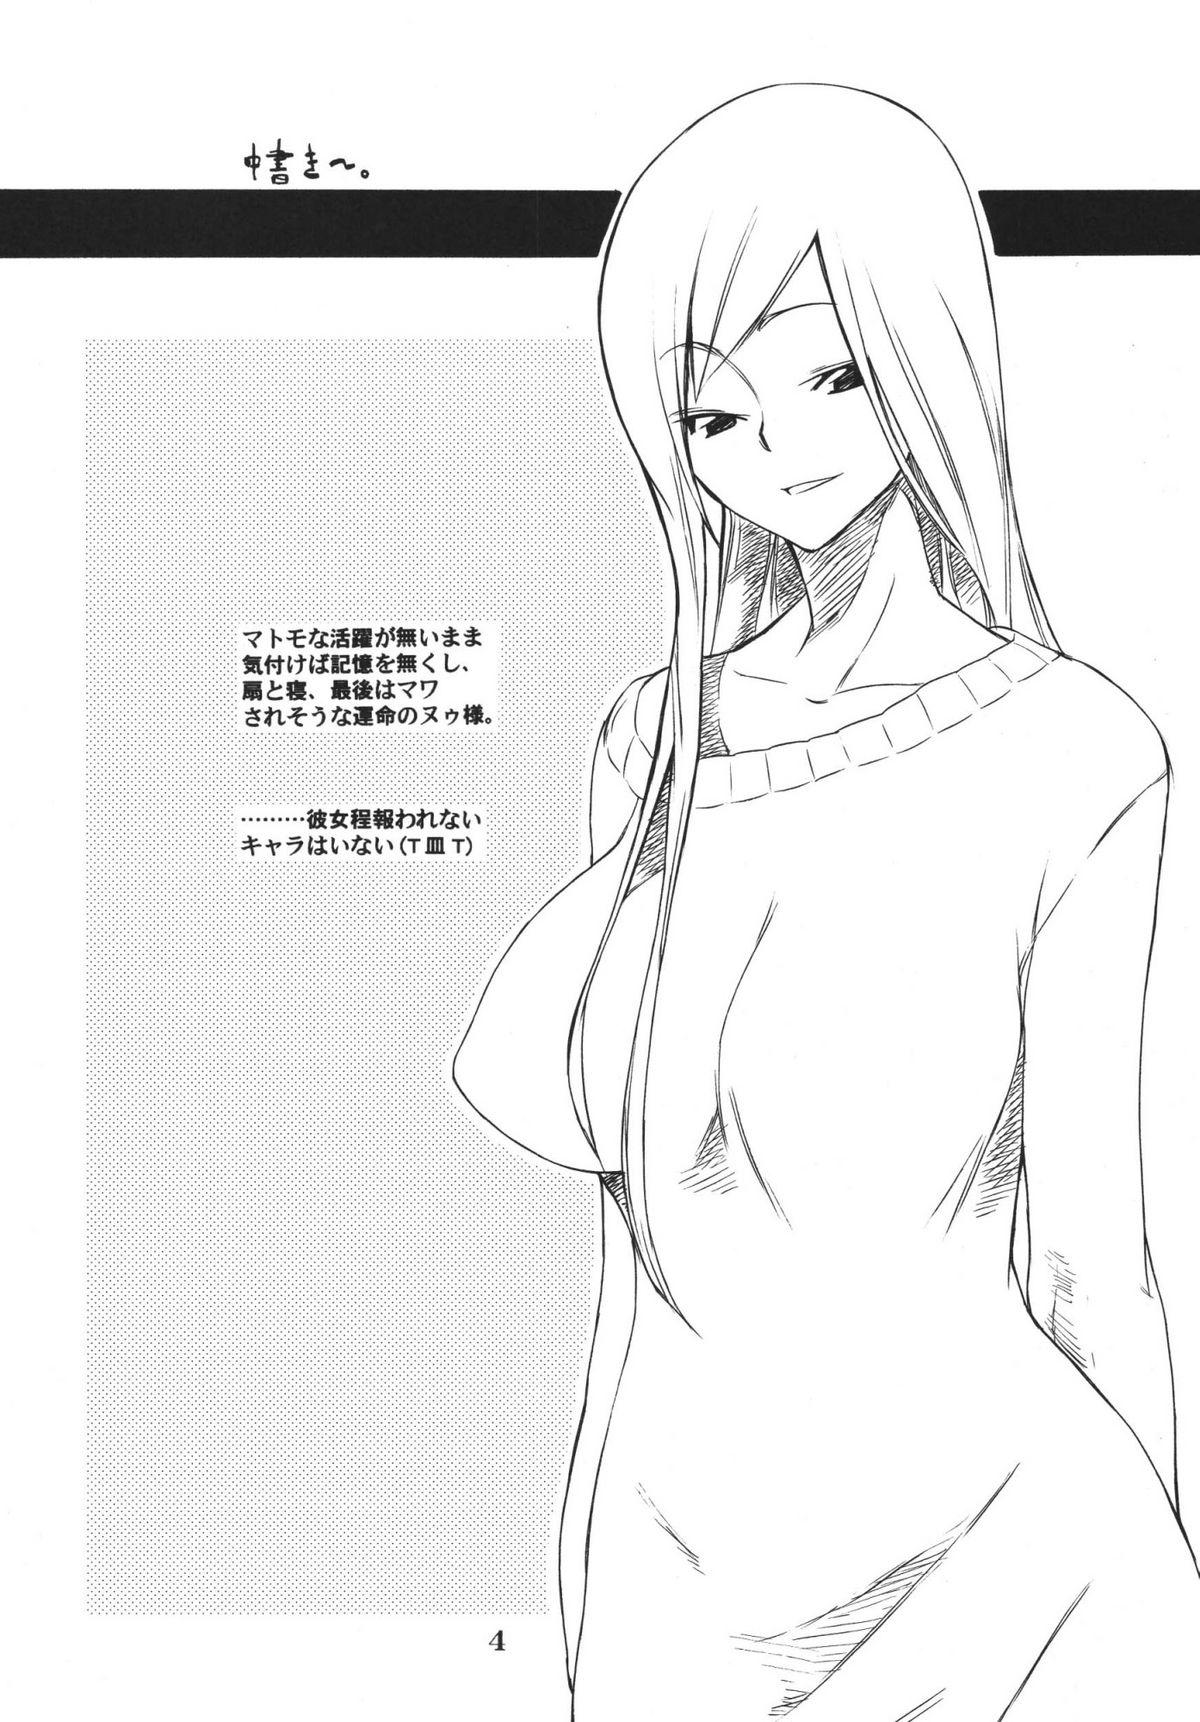 Hardcore Nu...! - Code geass Small Boobs - Page 4